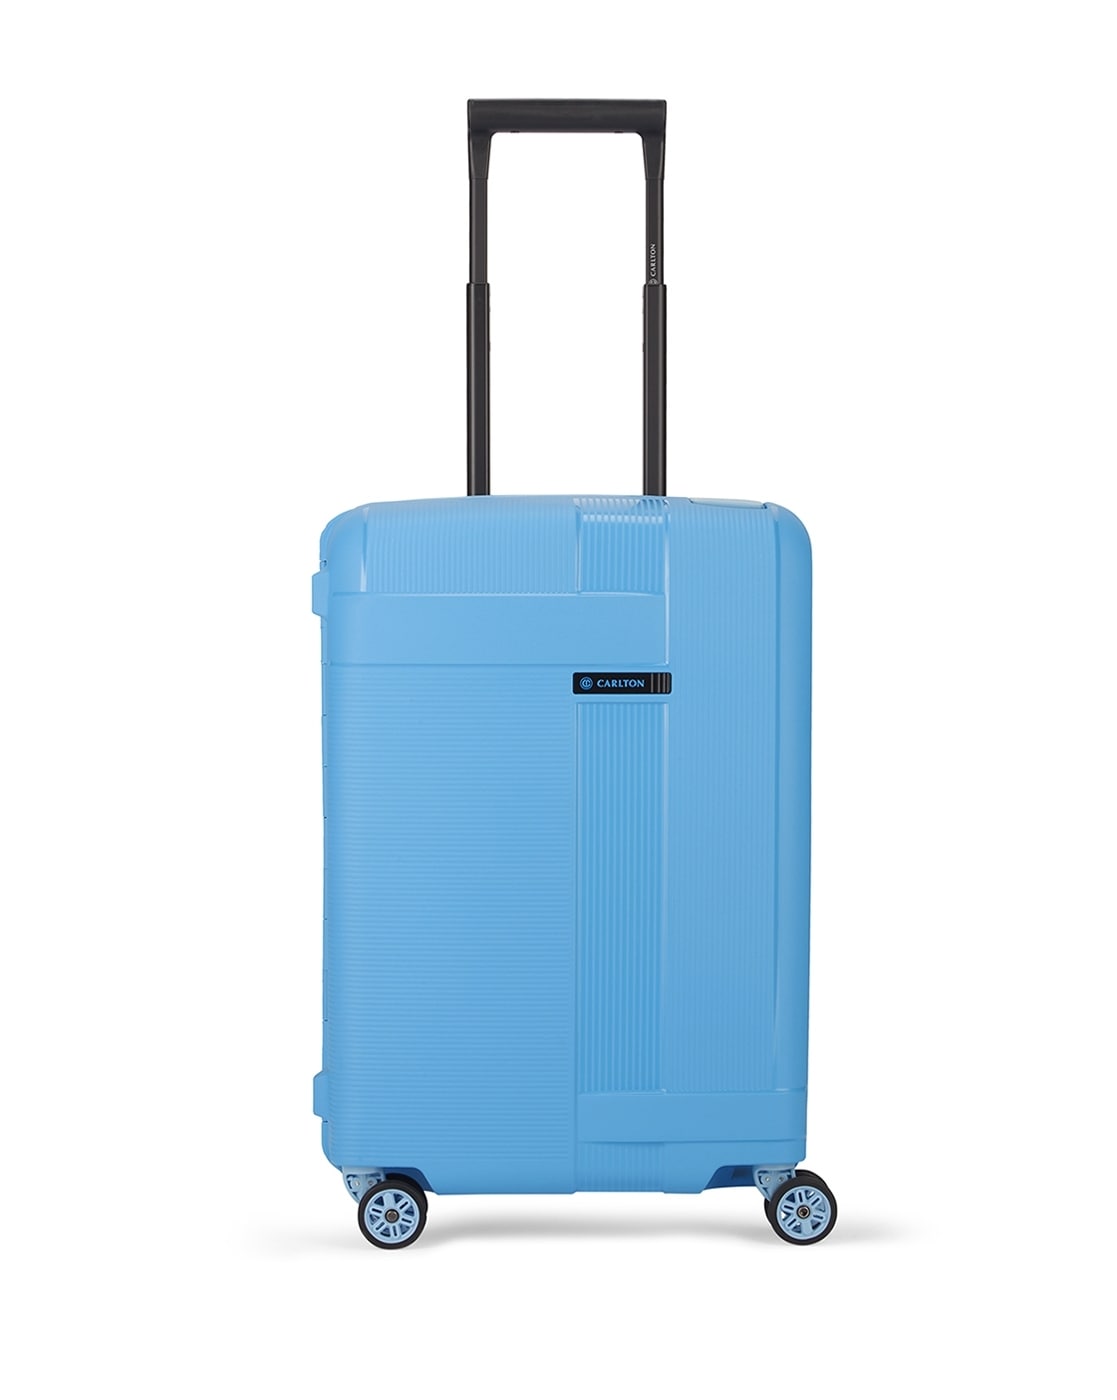 American Tourister Suitcase Baggage Delsey Hand luggage, Don Carlton, luggage  Bags, spinner png | PNGEgg